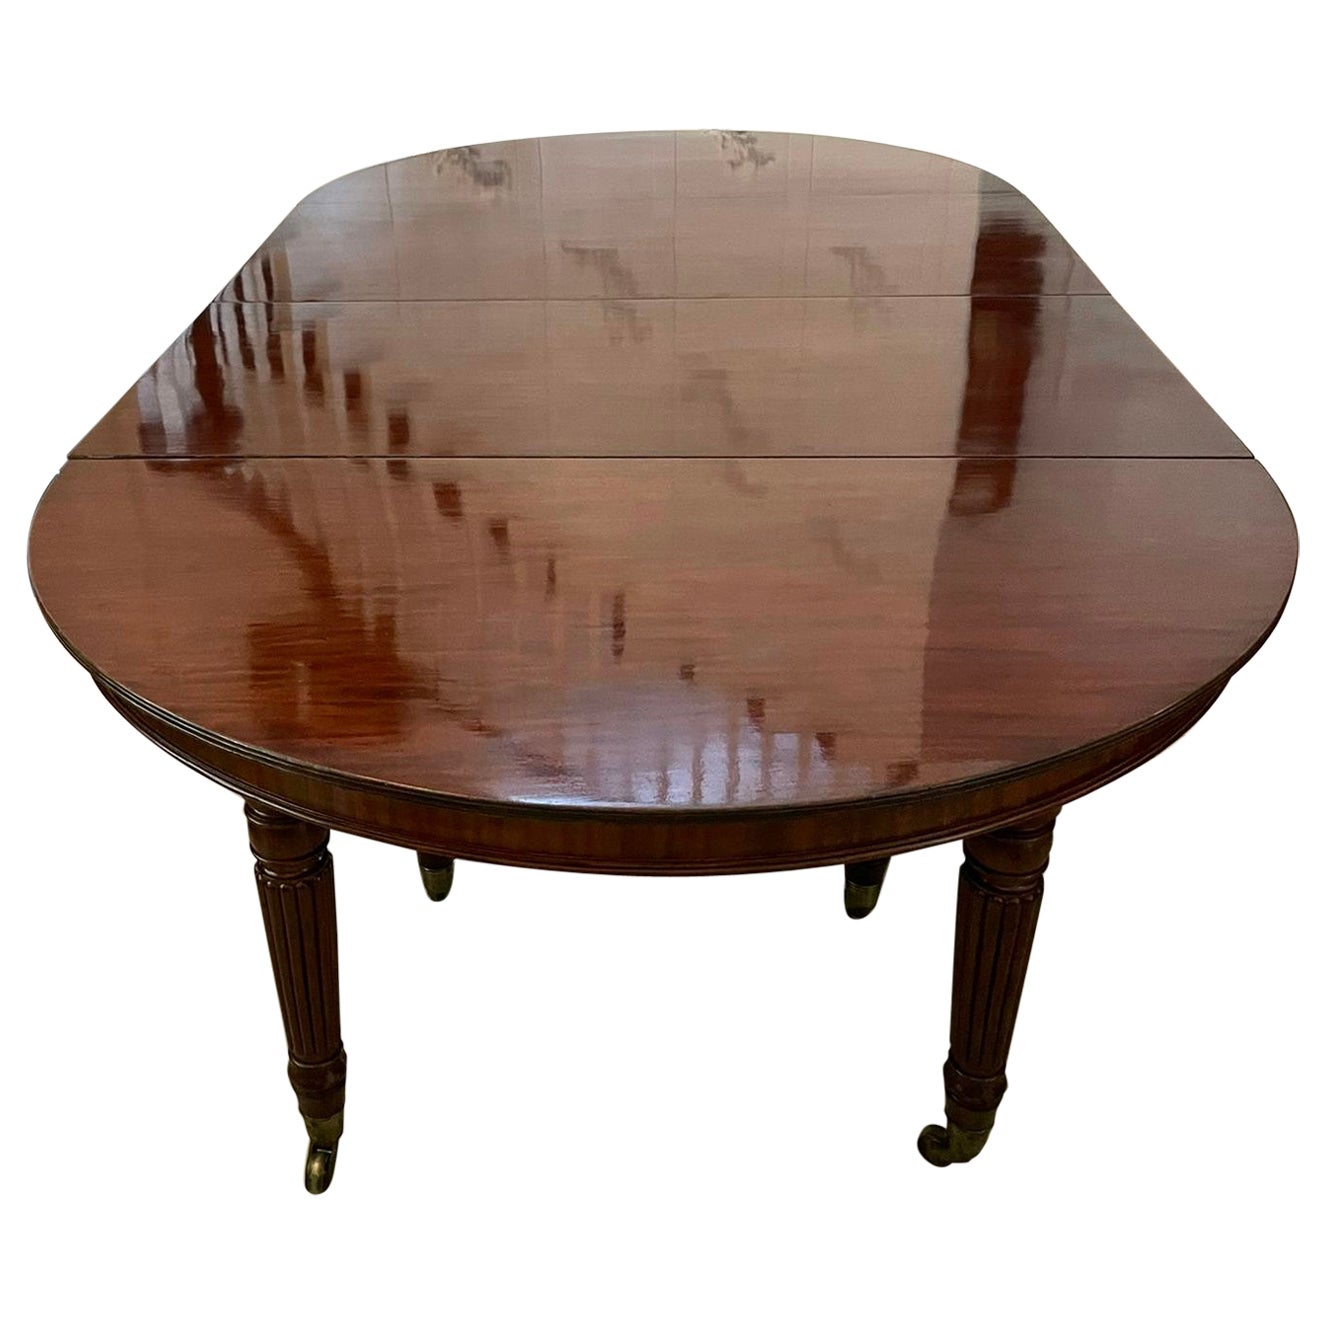 Outstanding Quality Large Antique 12 Seater Mahogany Extending Dining Table For Sale